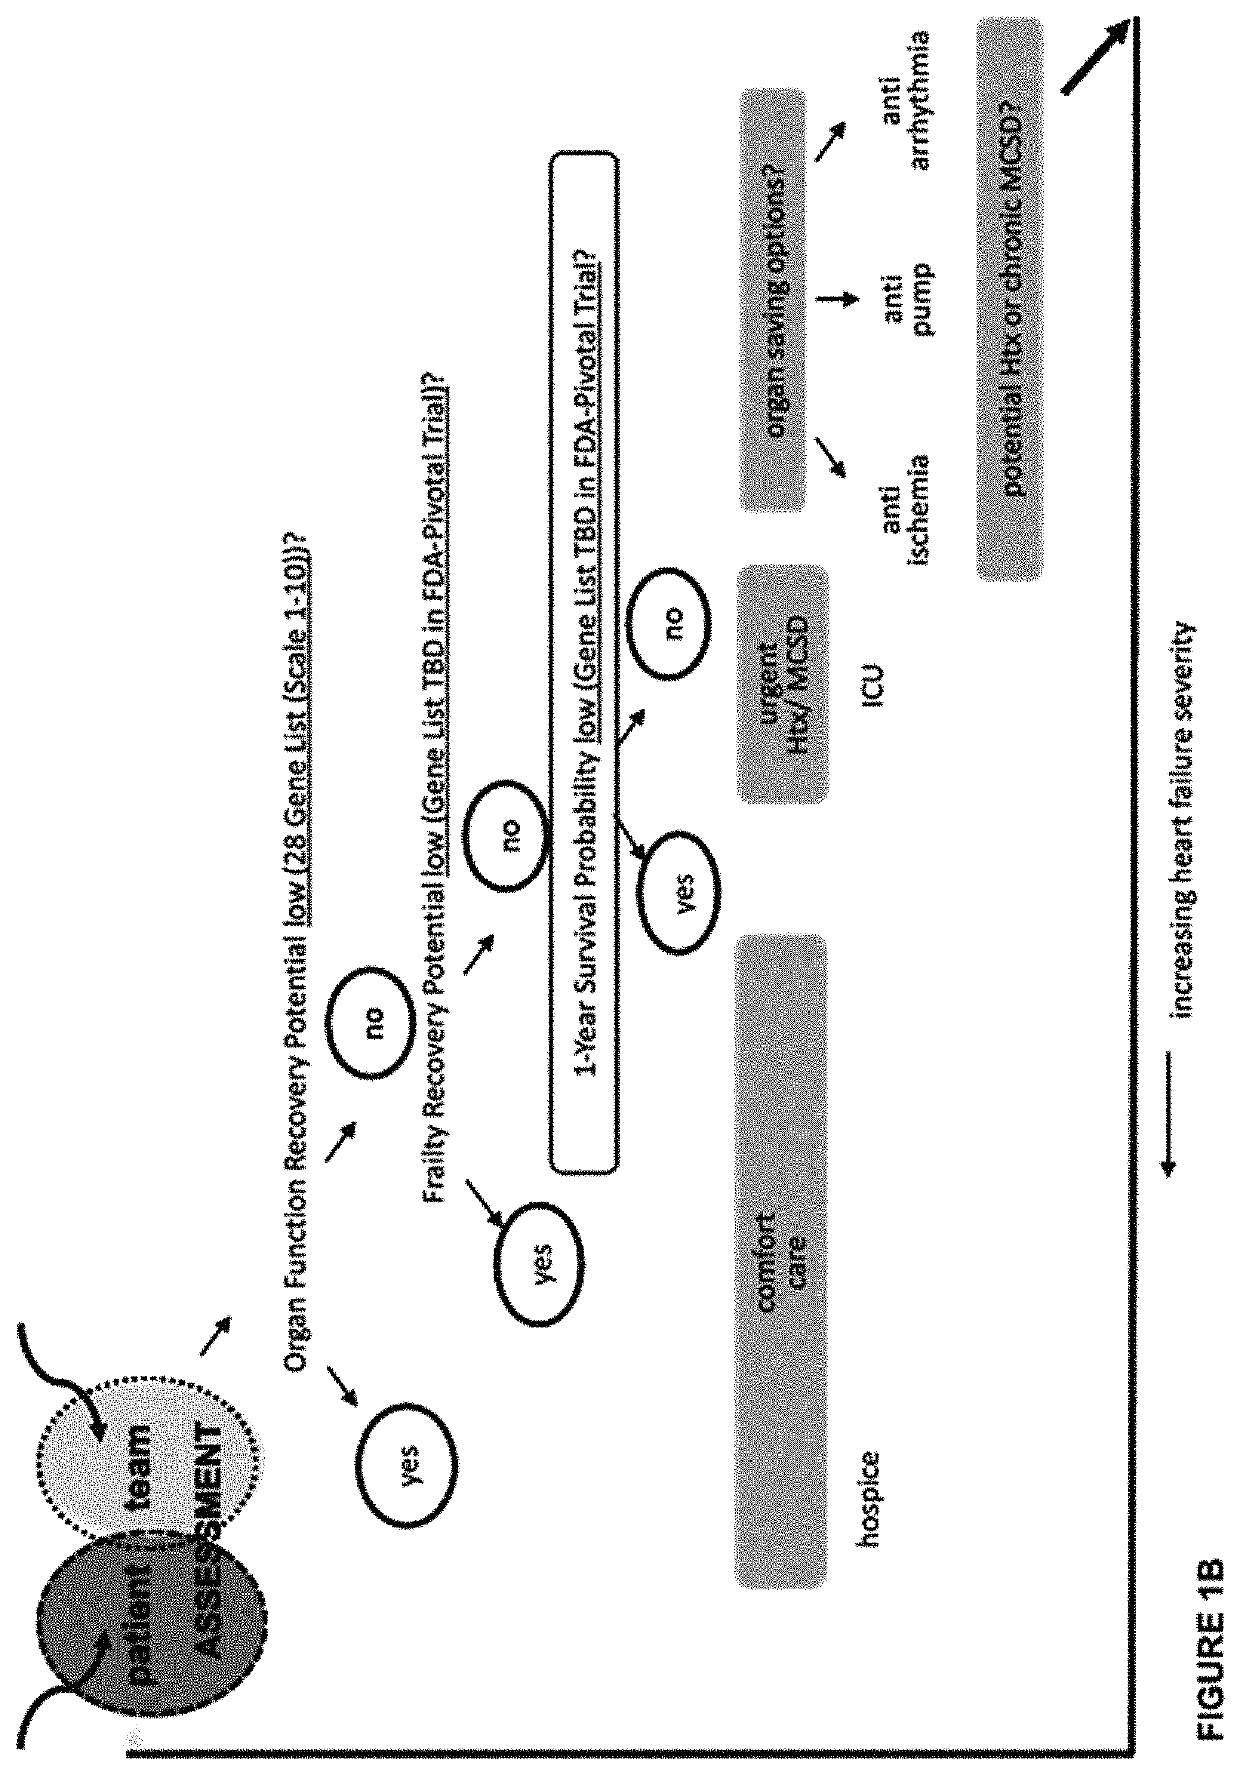 Assay for pre-operative prediction of organ function recovery